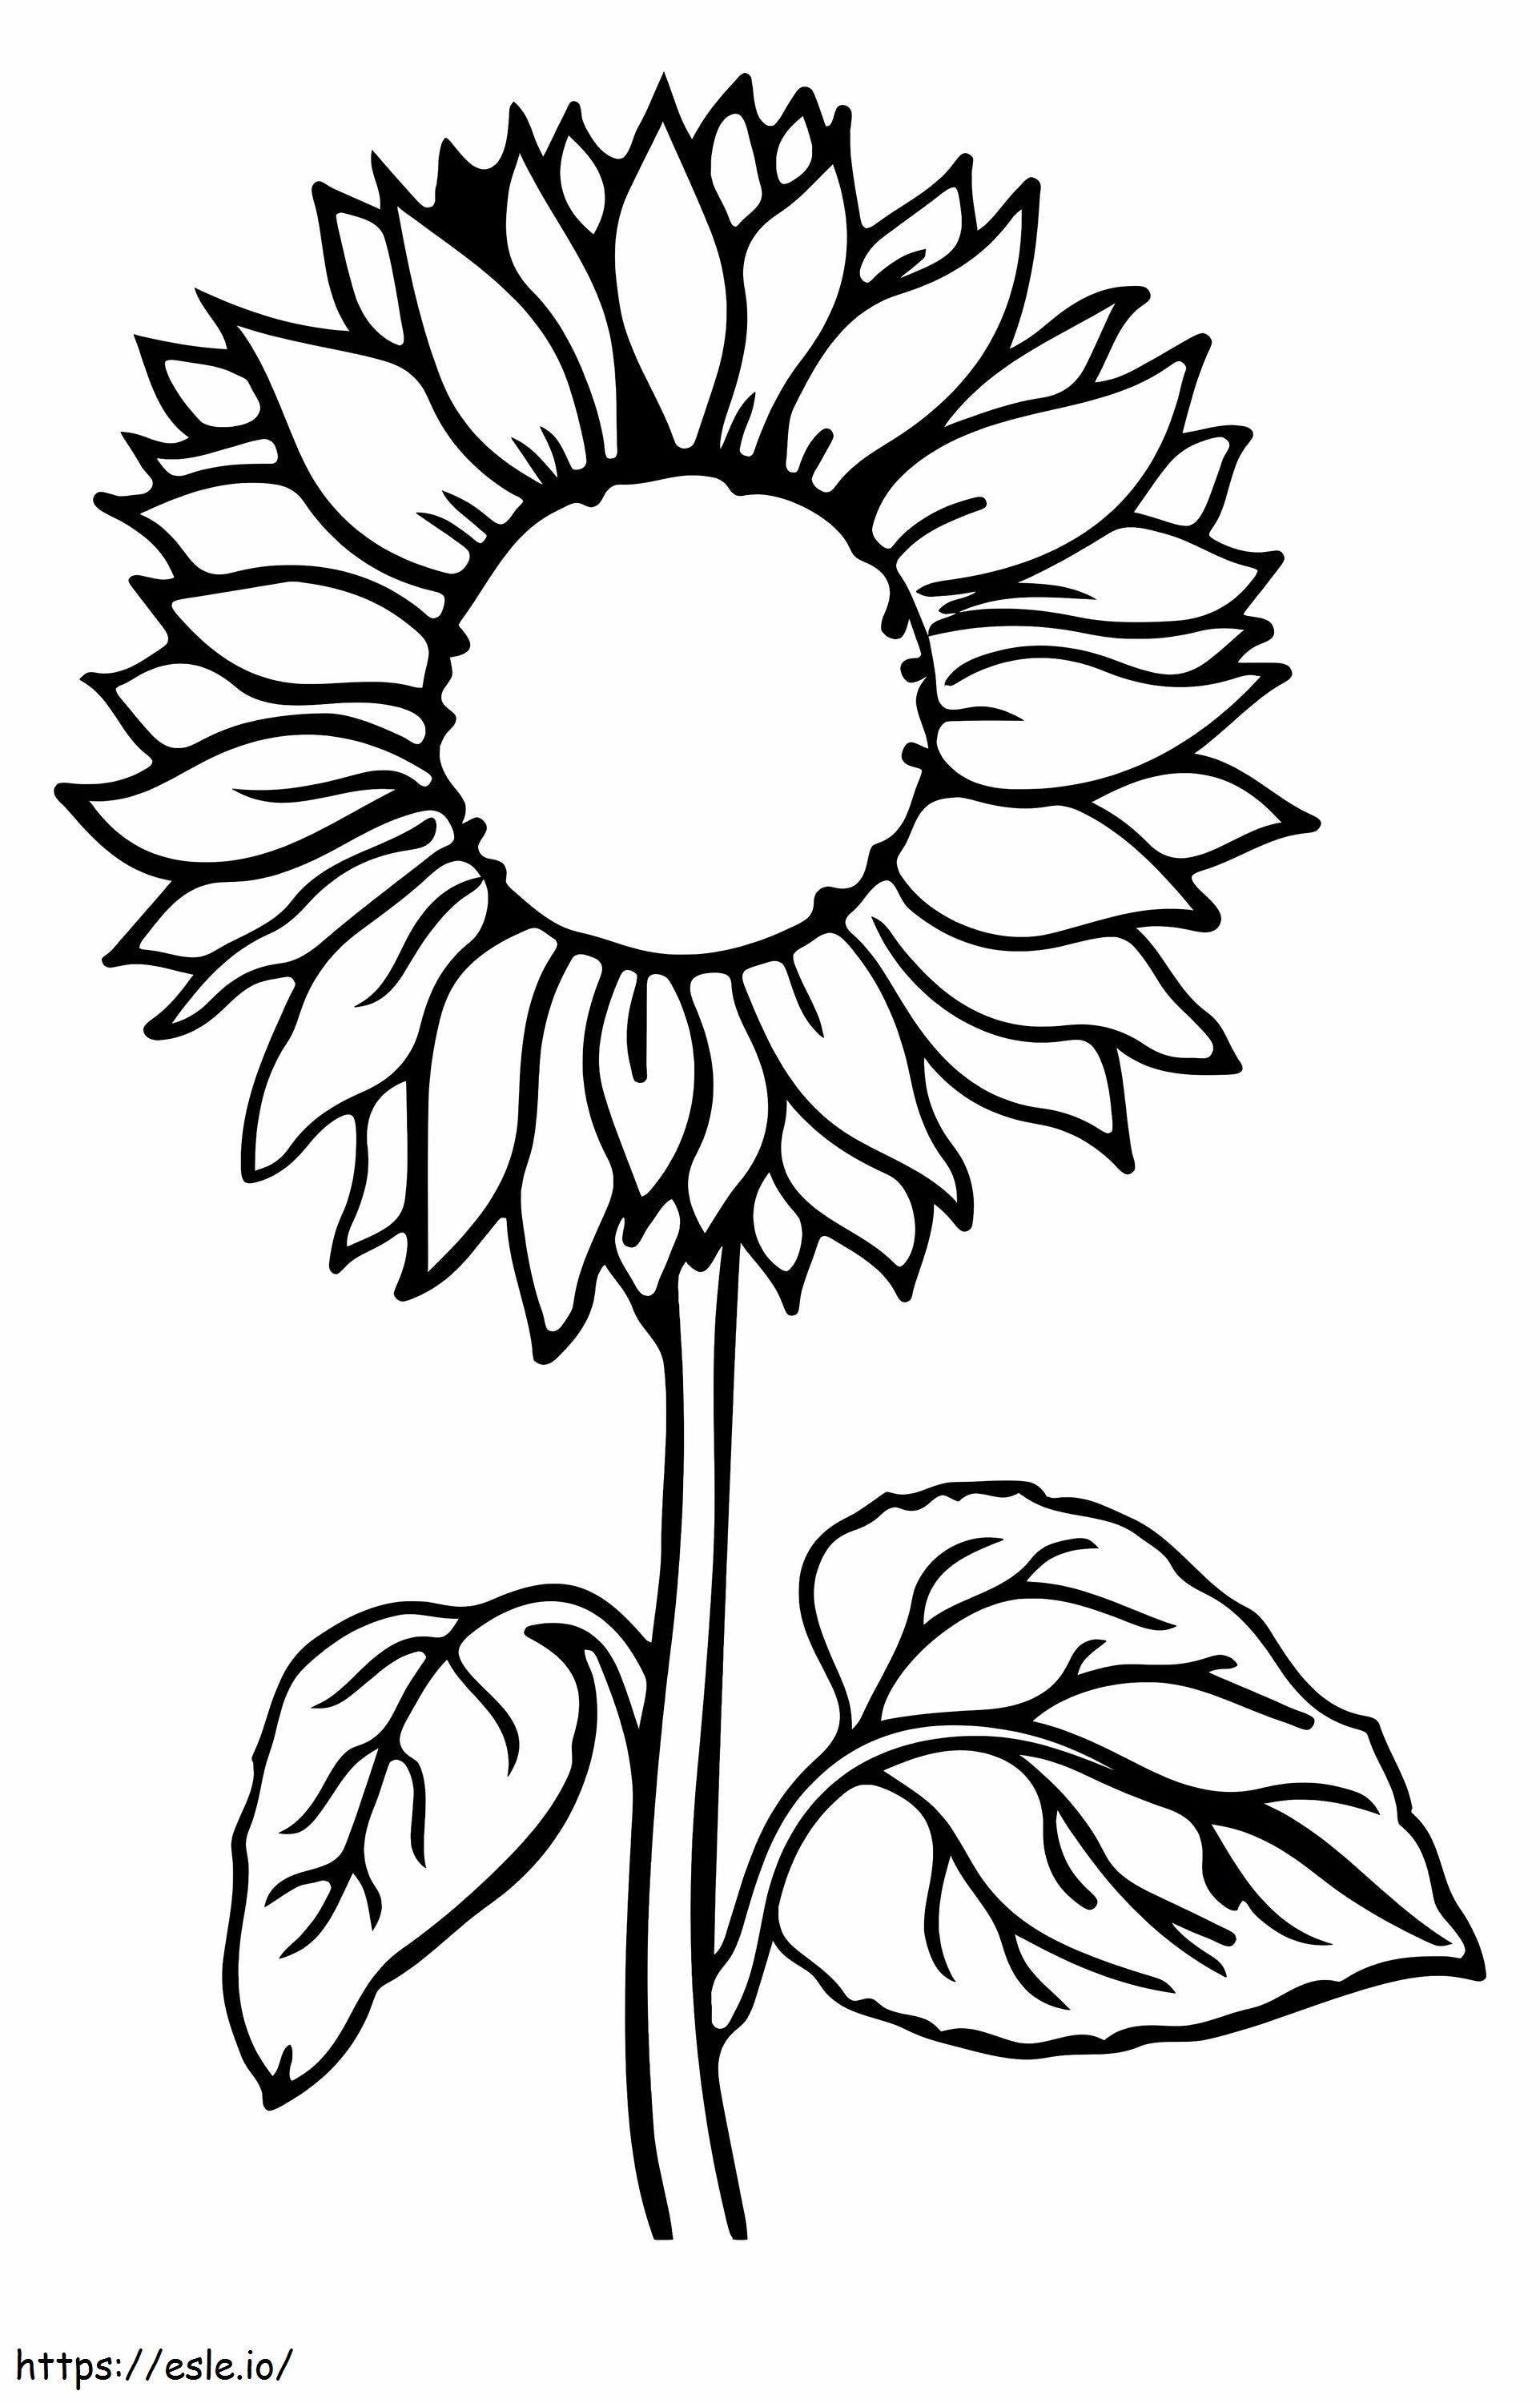 Regular Sunflower coloring page